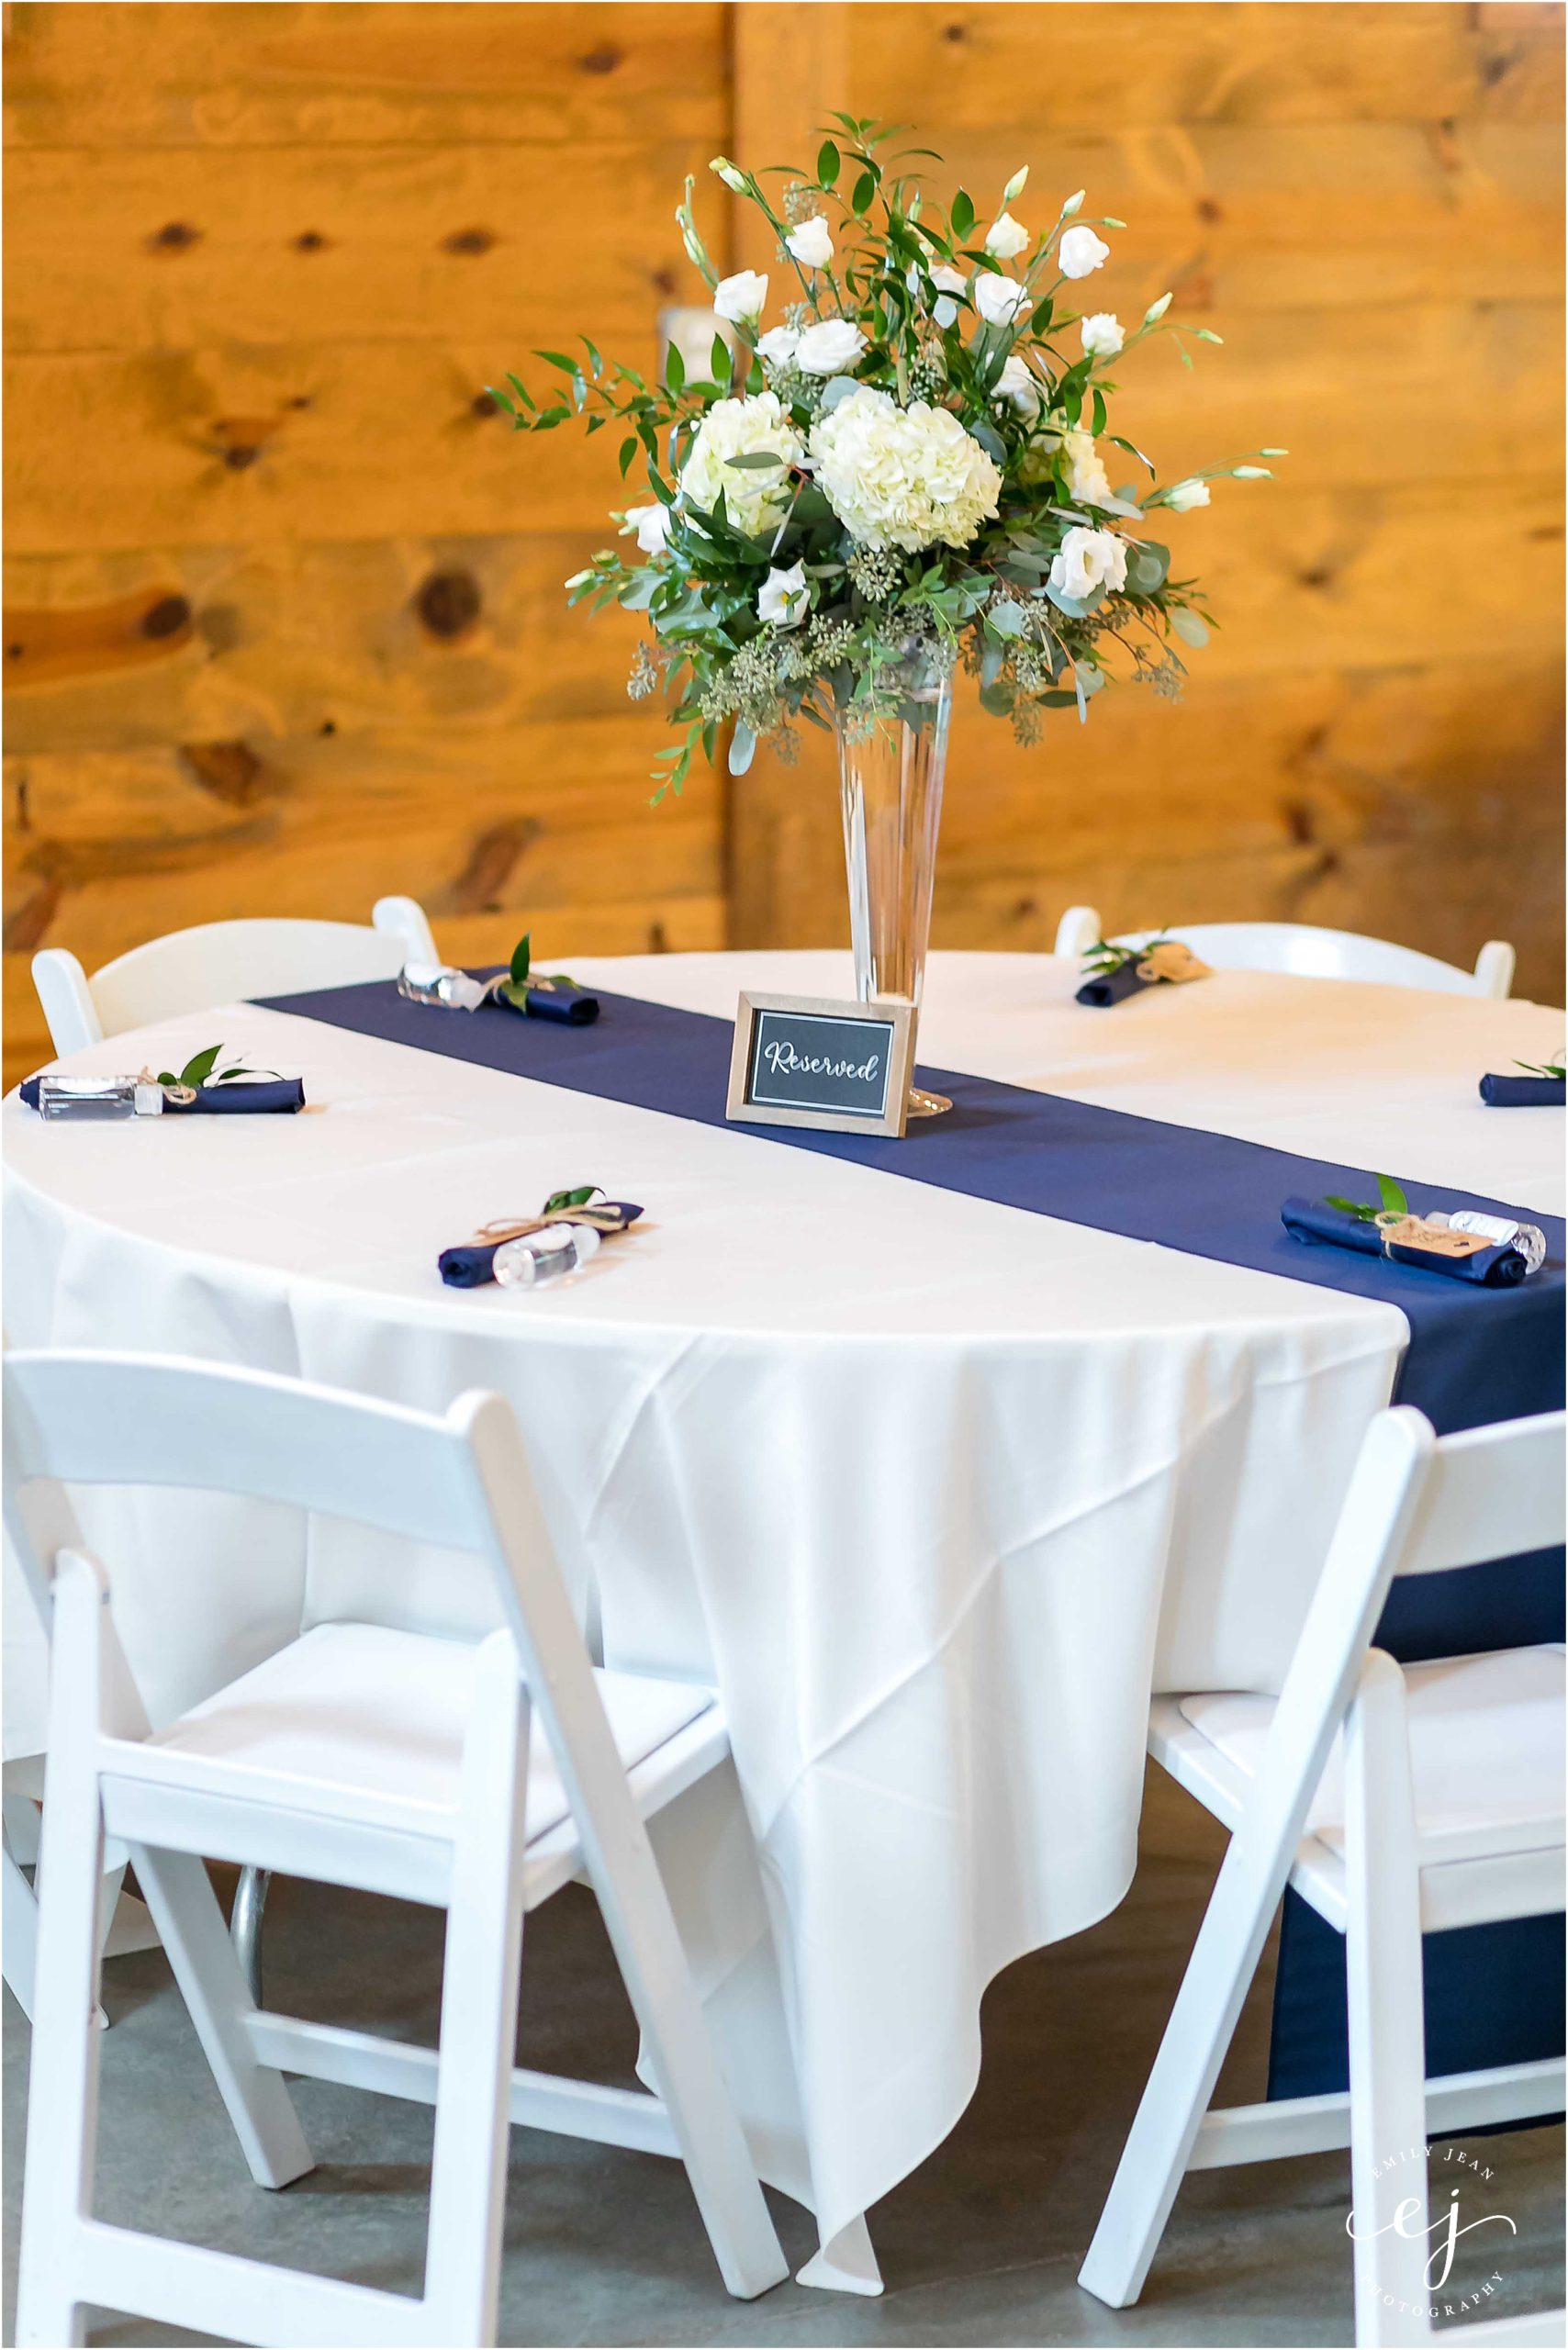 White linen tables round with navy blue satin runner and white centerpiece flowers in a glass vase edgewood farm